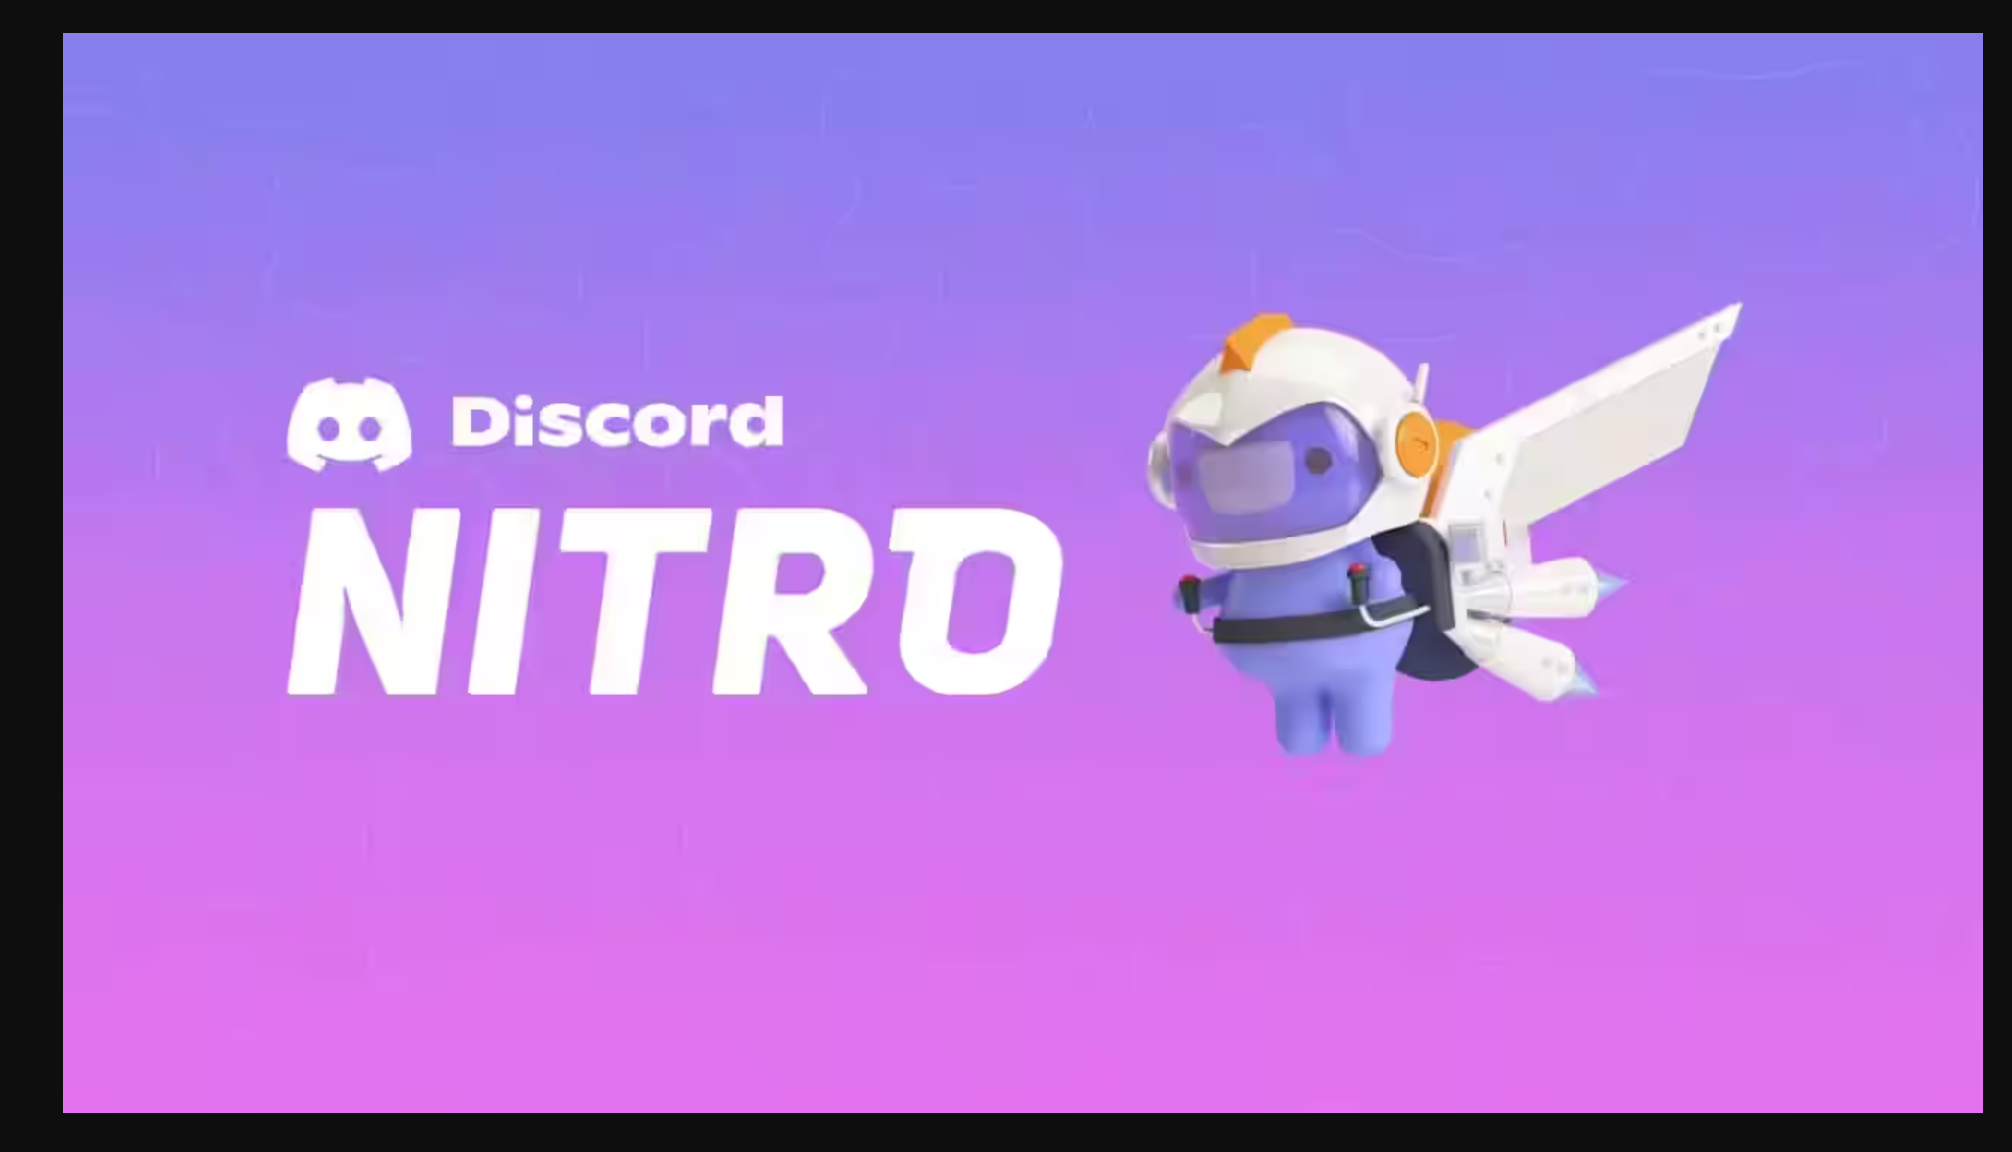 Nitro version of Discord (Available with Premium Subscription)